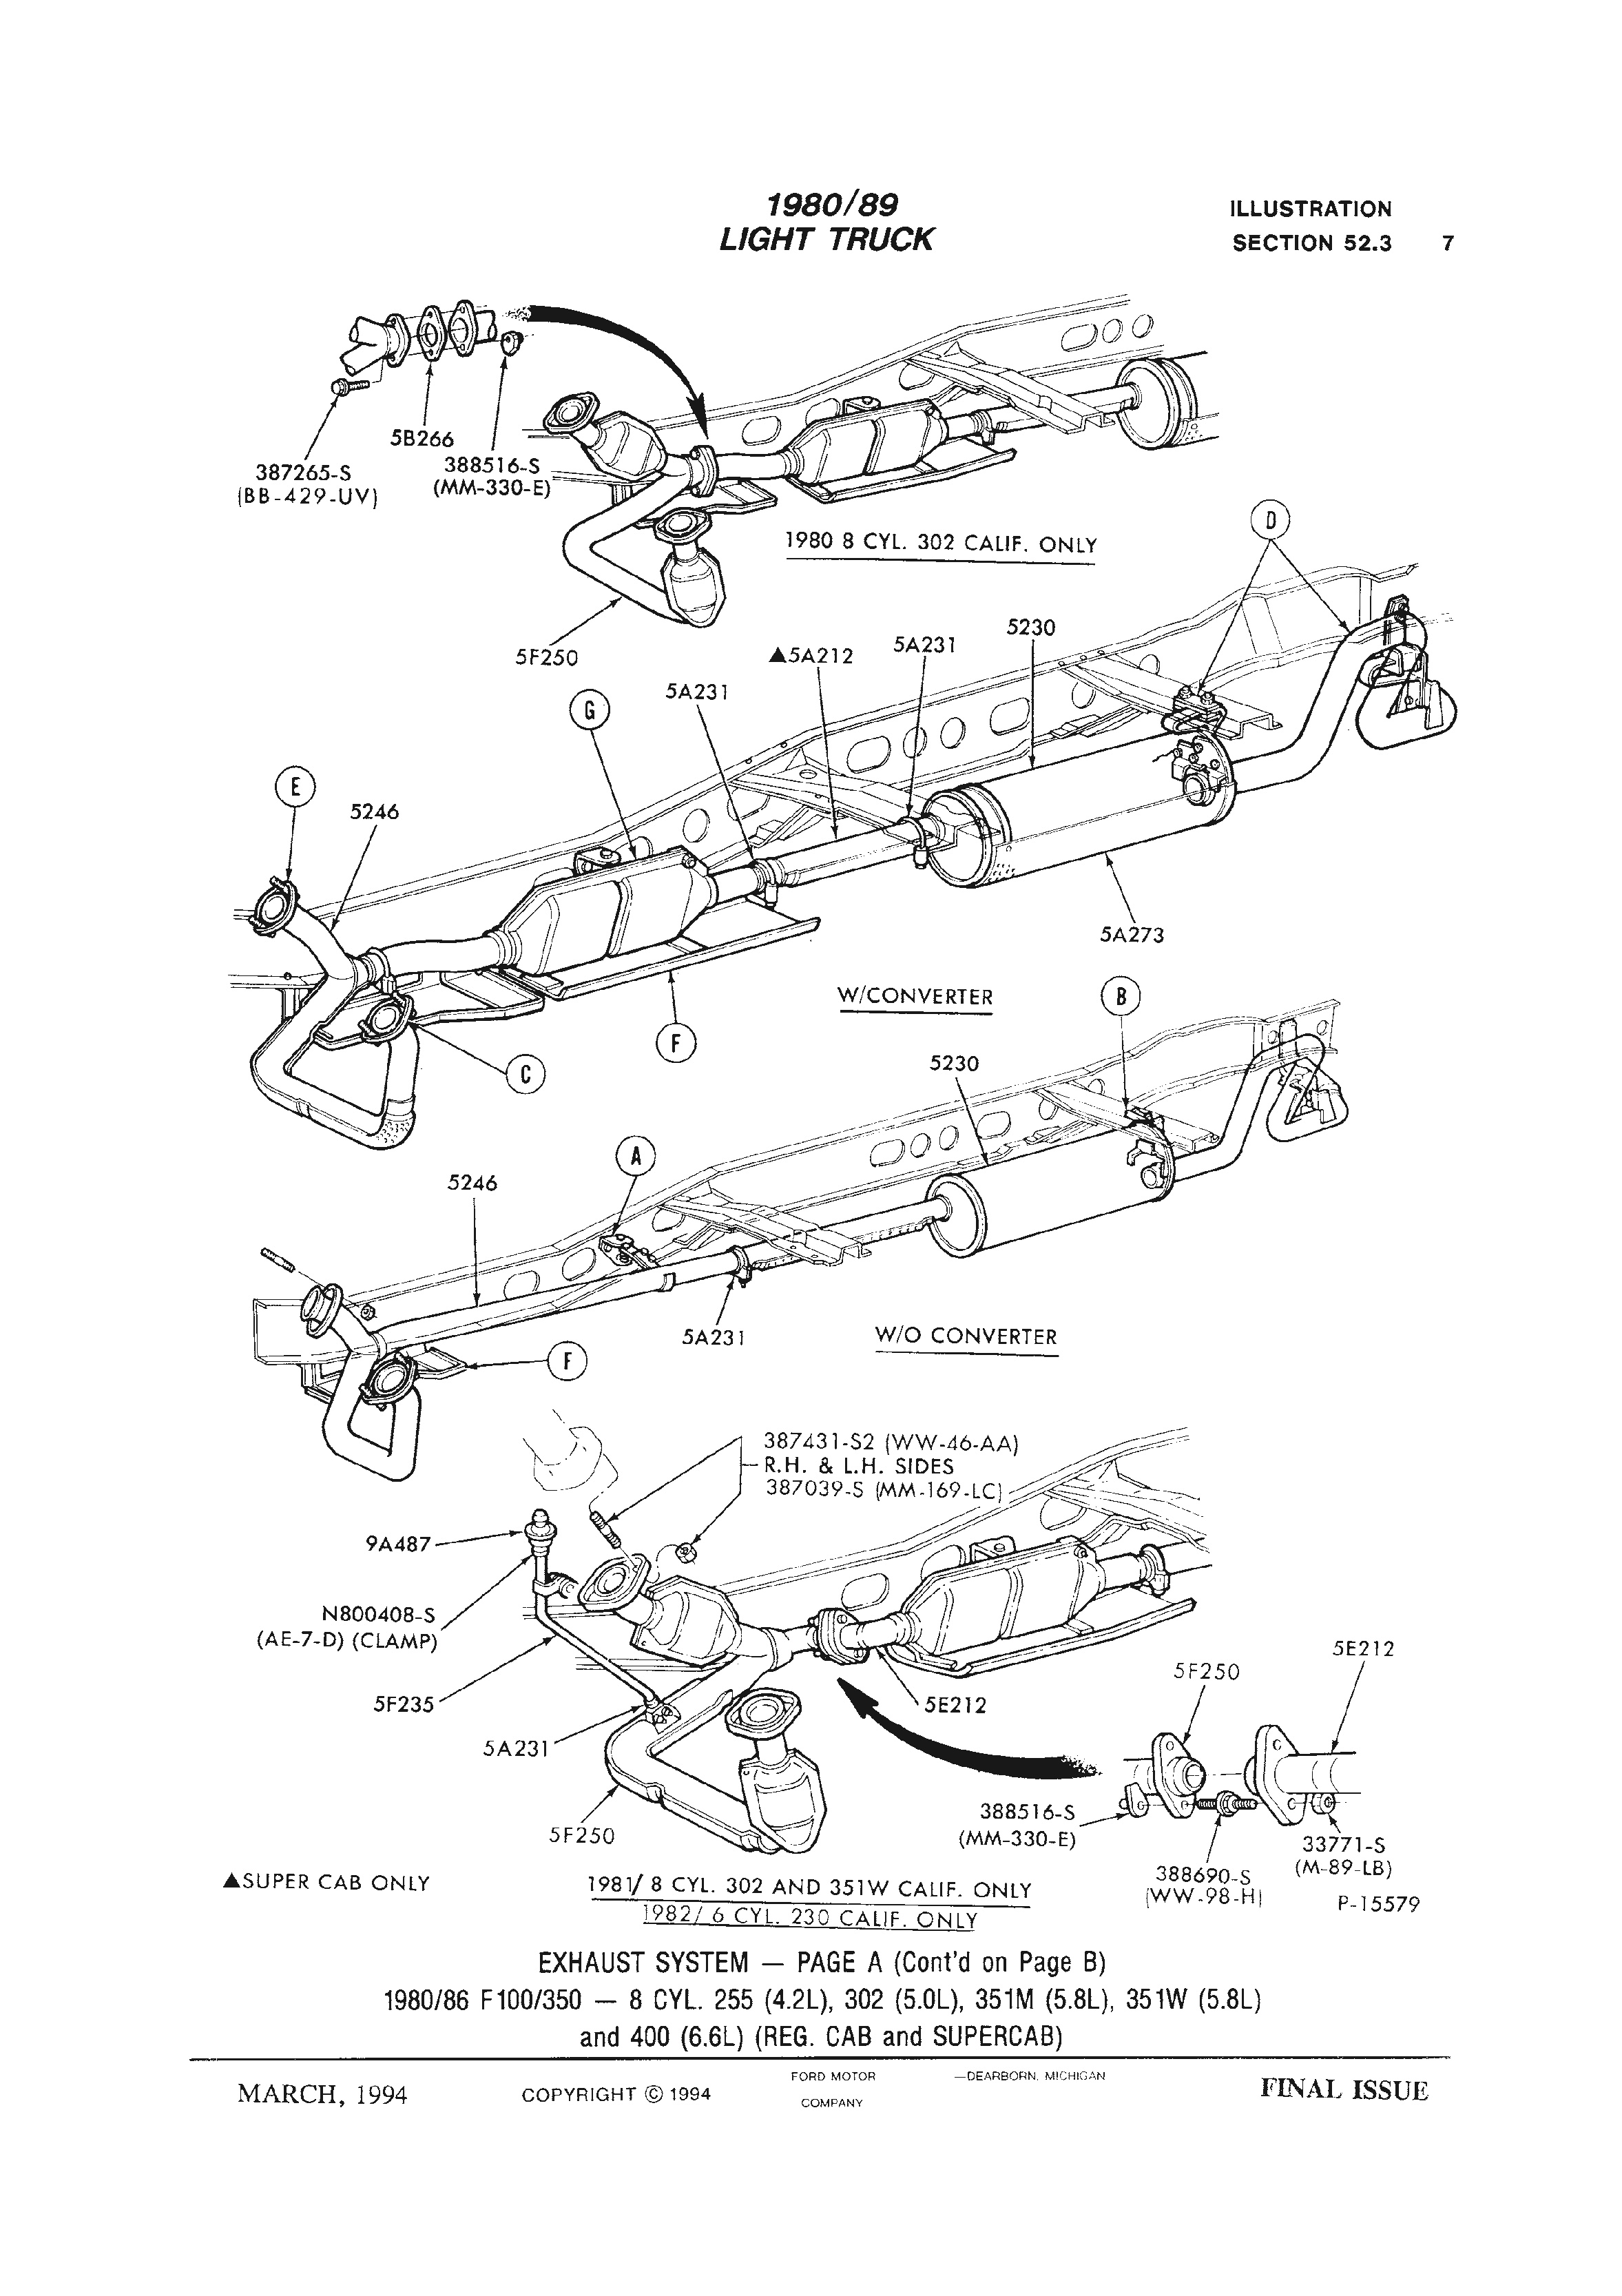 Help with replacing my exhaust system - Ford Truck Enthusiasts Forums